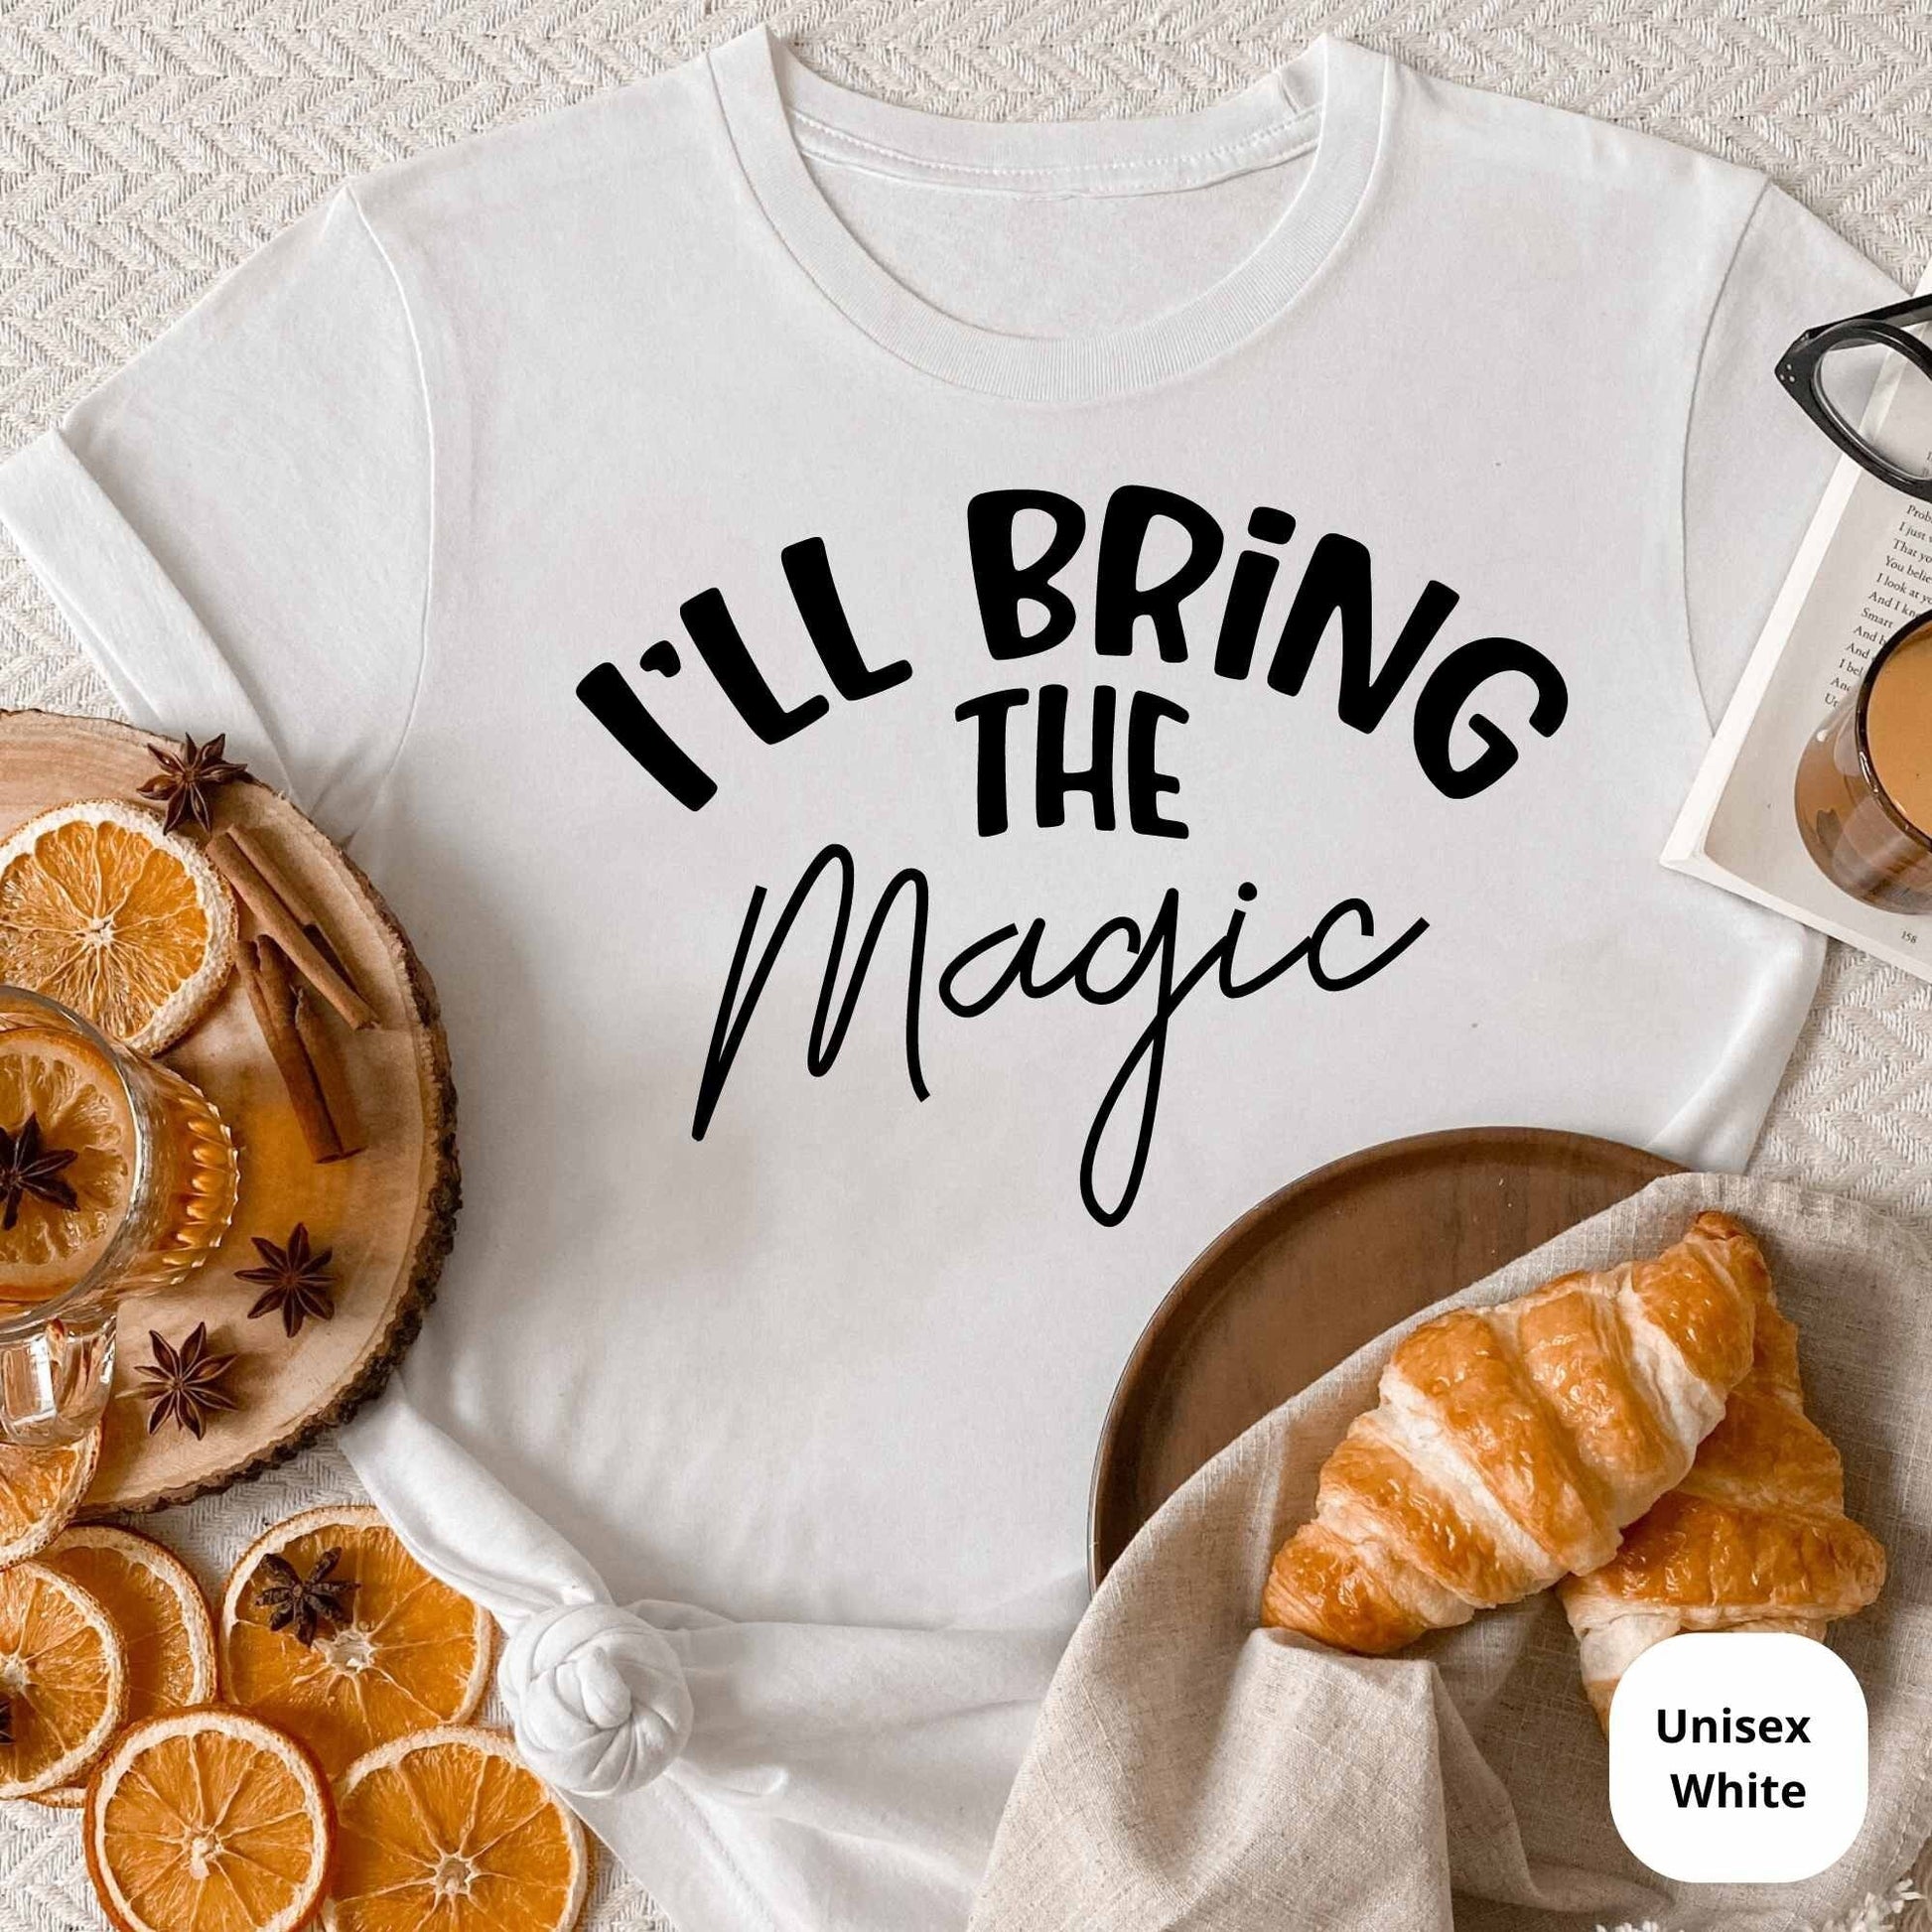 I'll Bring The...Funny 60th Birthday Party Shirts, Celebrate in Style with Our Fun and Funky Birthday Shirt! HMDesignStudioUS